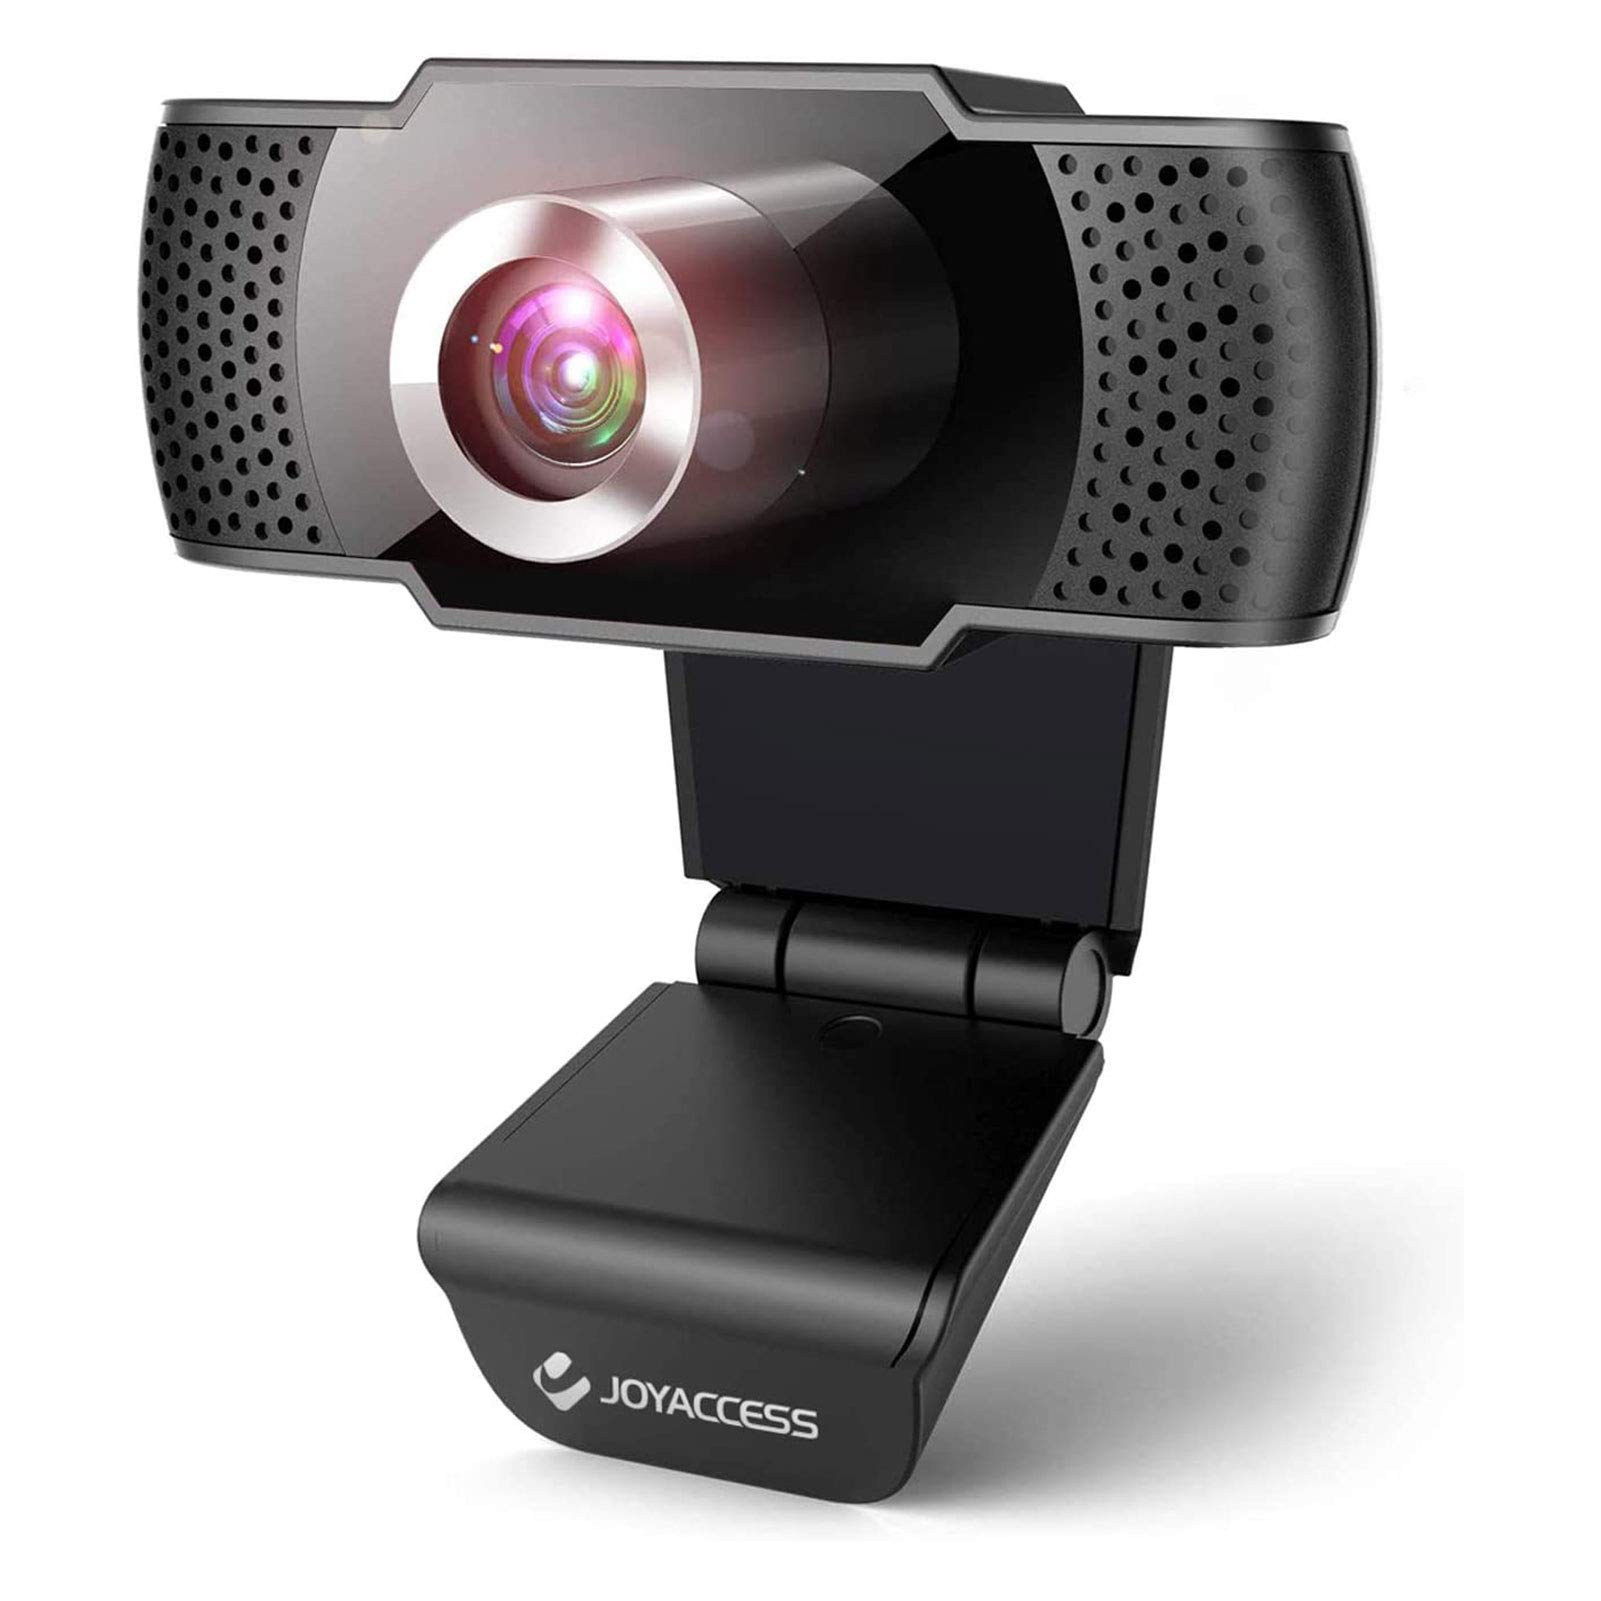 Webcam 1080P Full HD, Webcam with Microphone for PC, USB 2.0 Web Camera, Webcam for Video Calls, Plug and Play, Recording, Studying, Game and Conferencing on Zoom/YouTube and skype